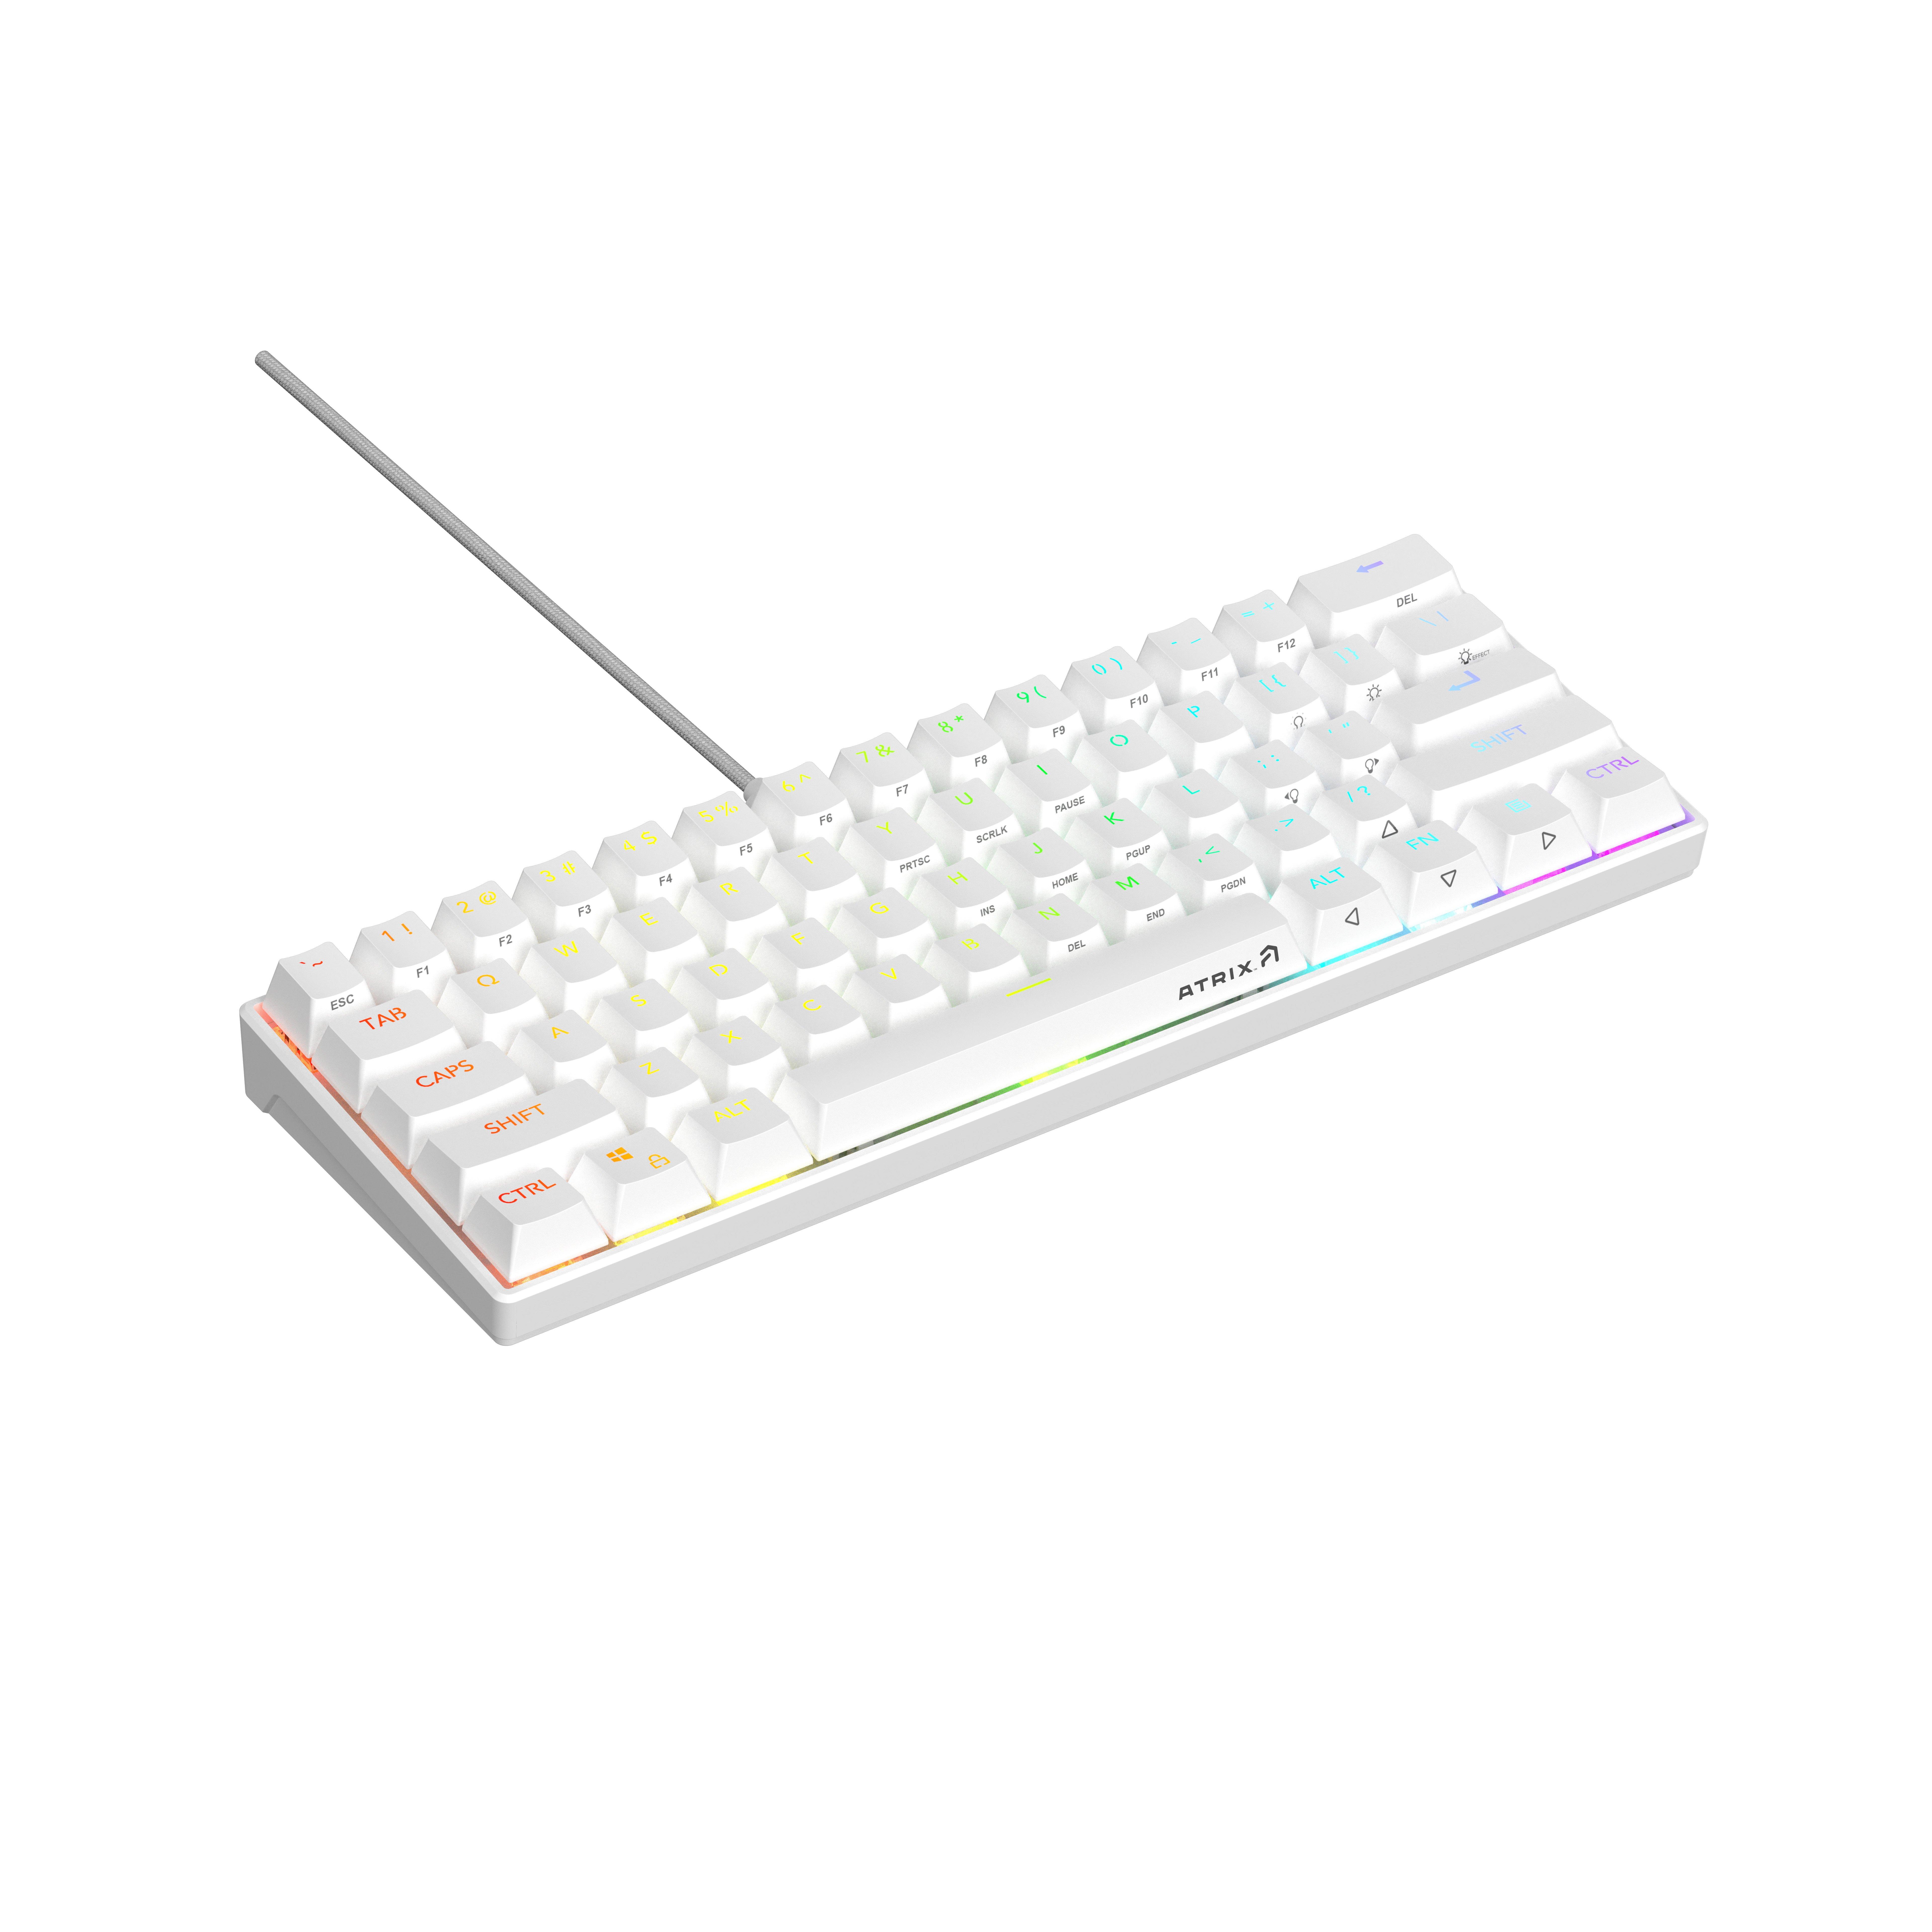  Compact 80 Percent Mechanical Gaming Keyboard, Wired